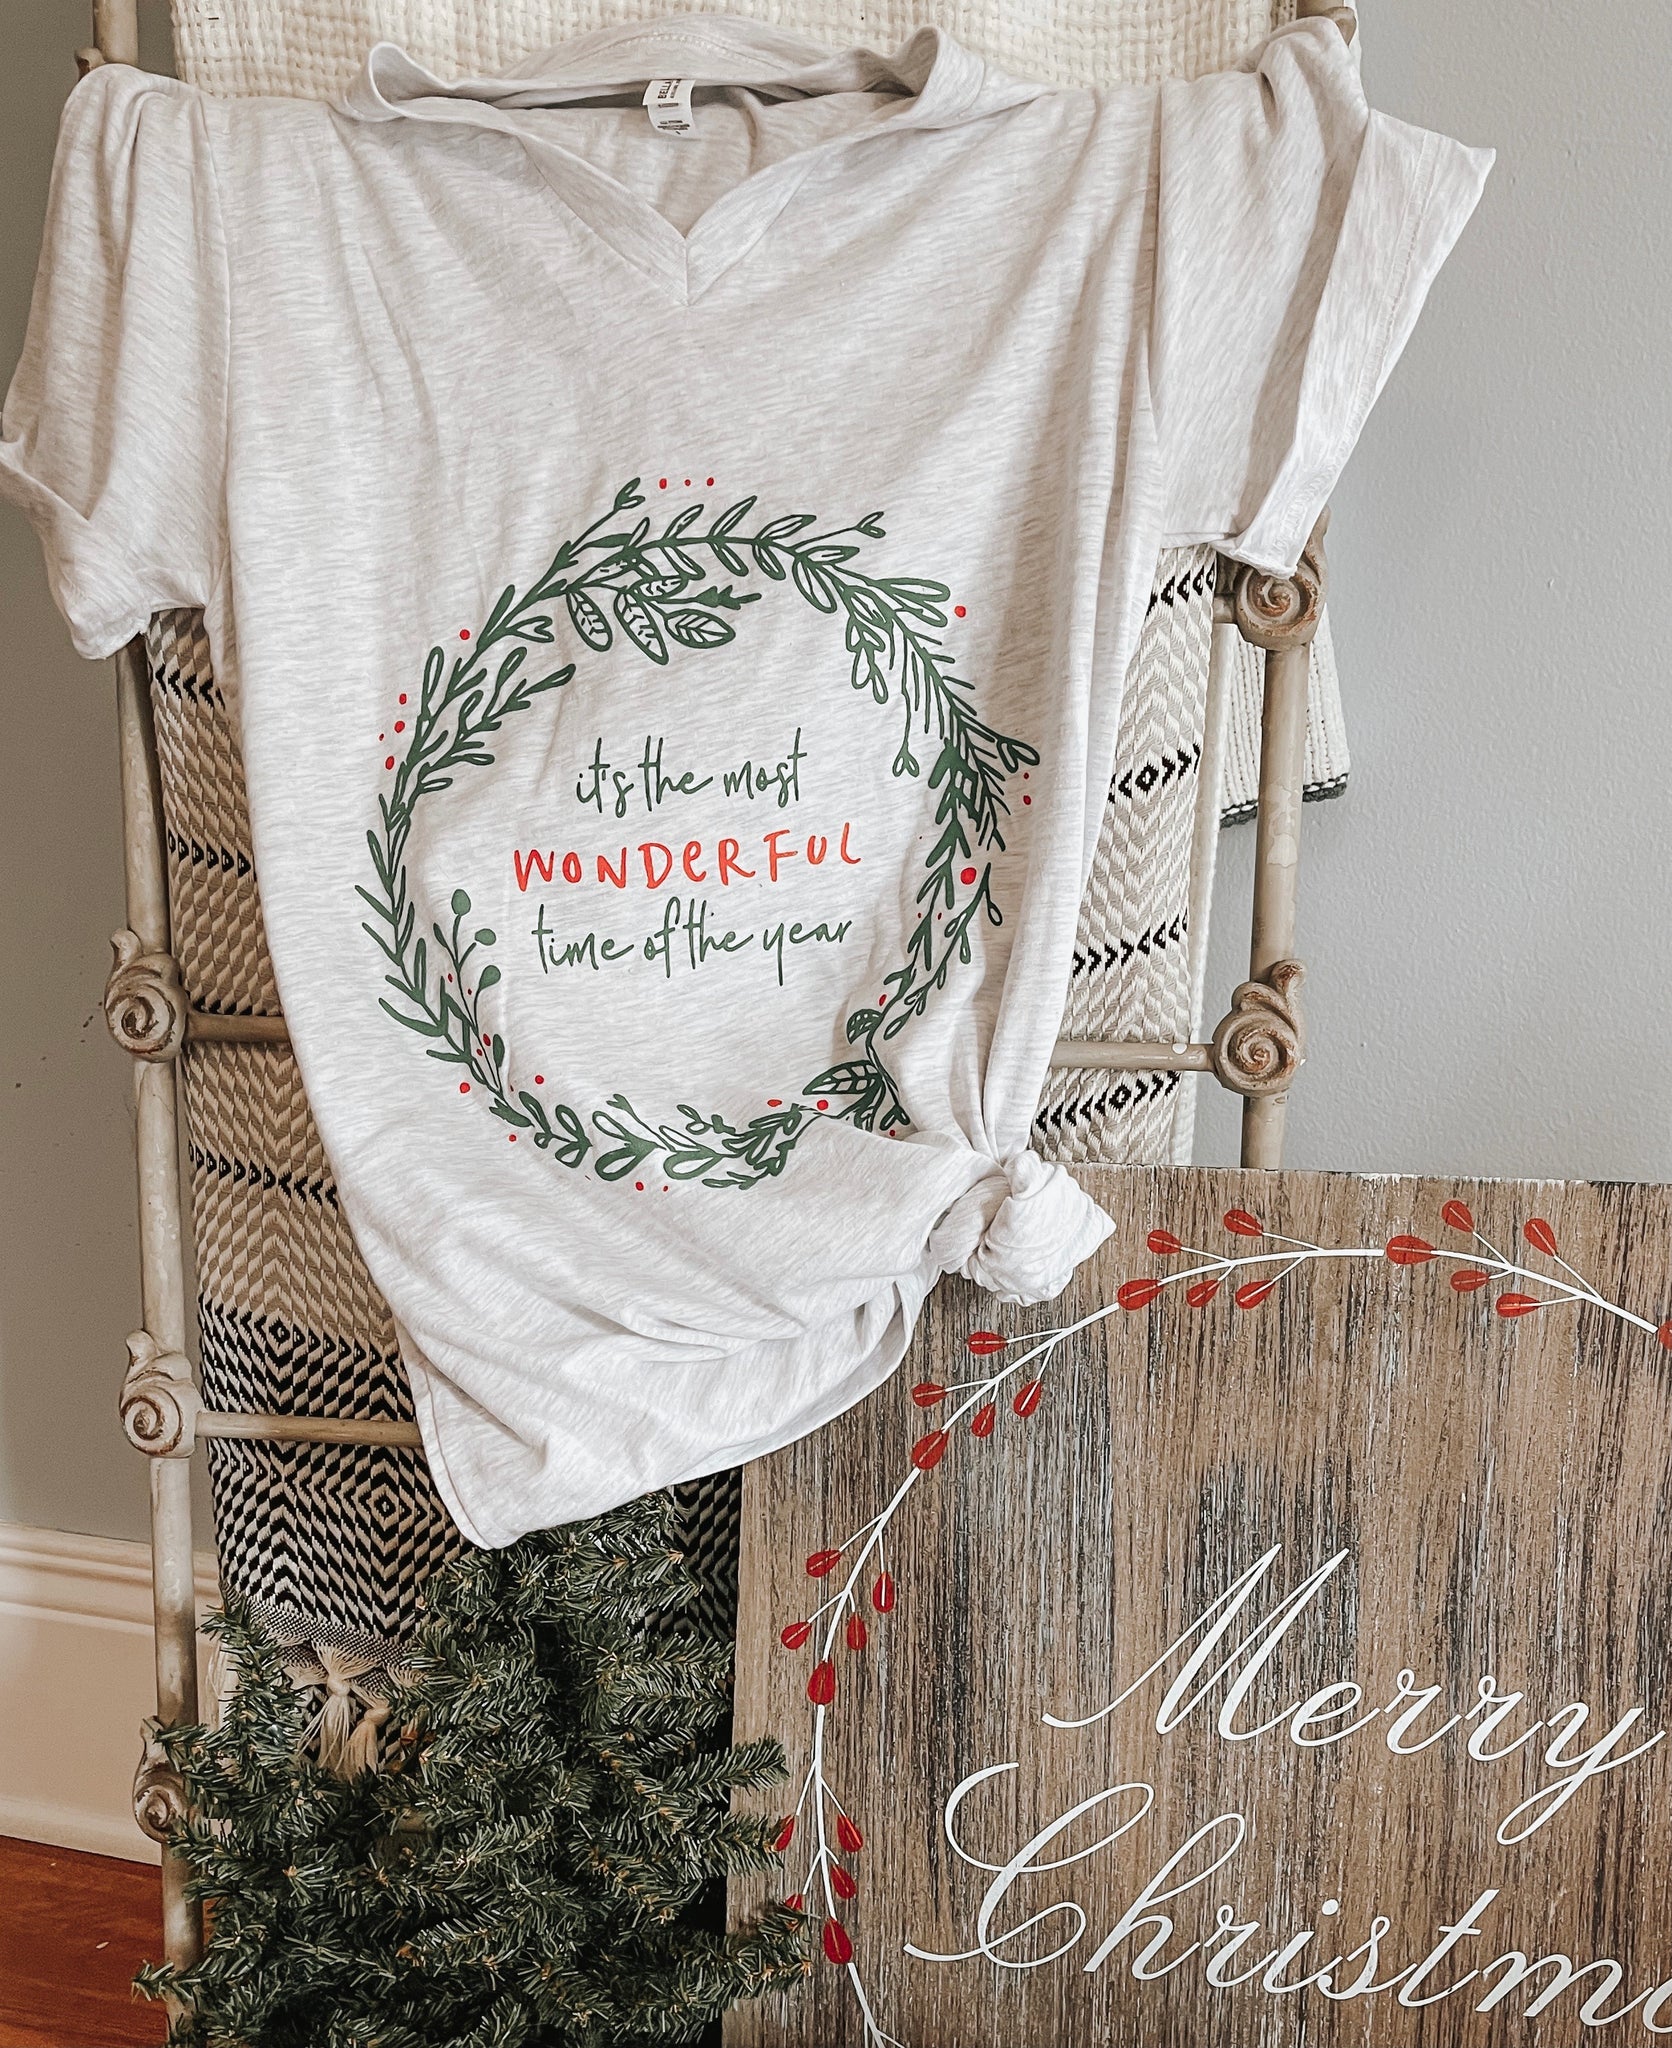 Most Wonderful Time of the Year- Short-Sleeve Shirt - Christmas